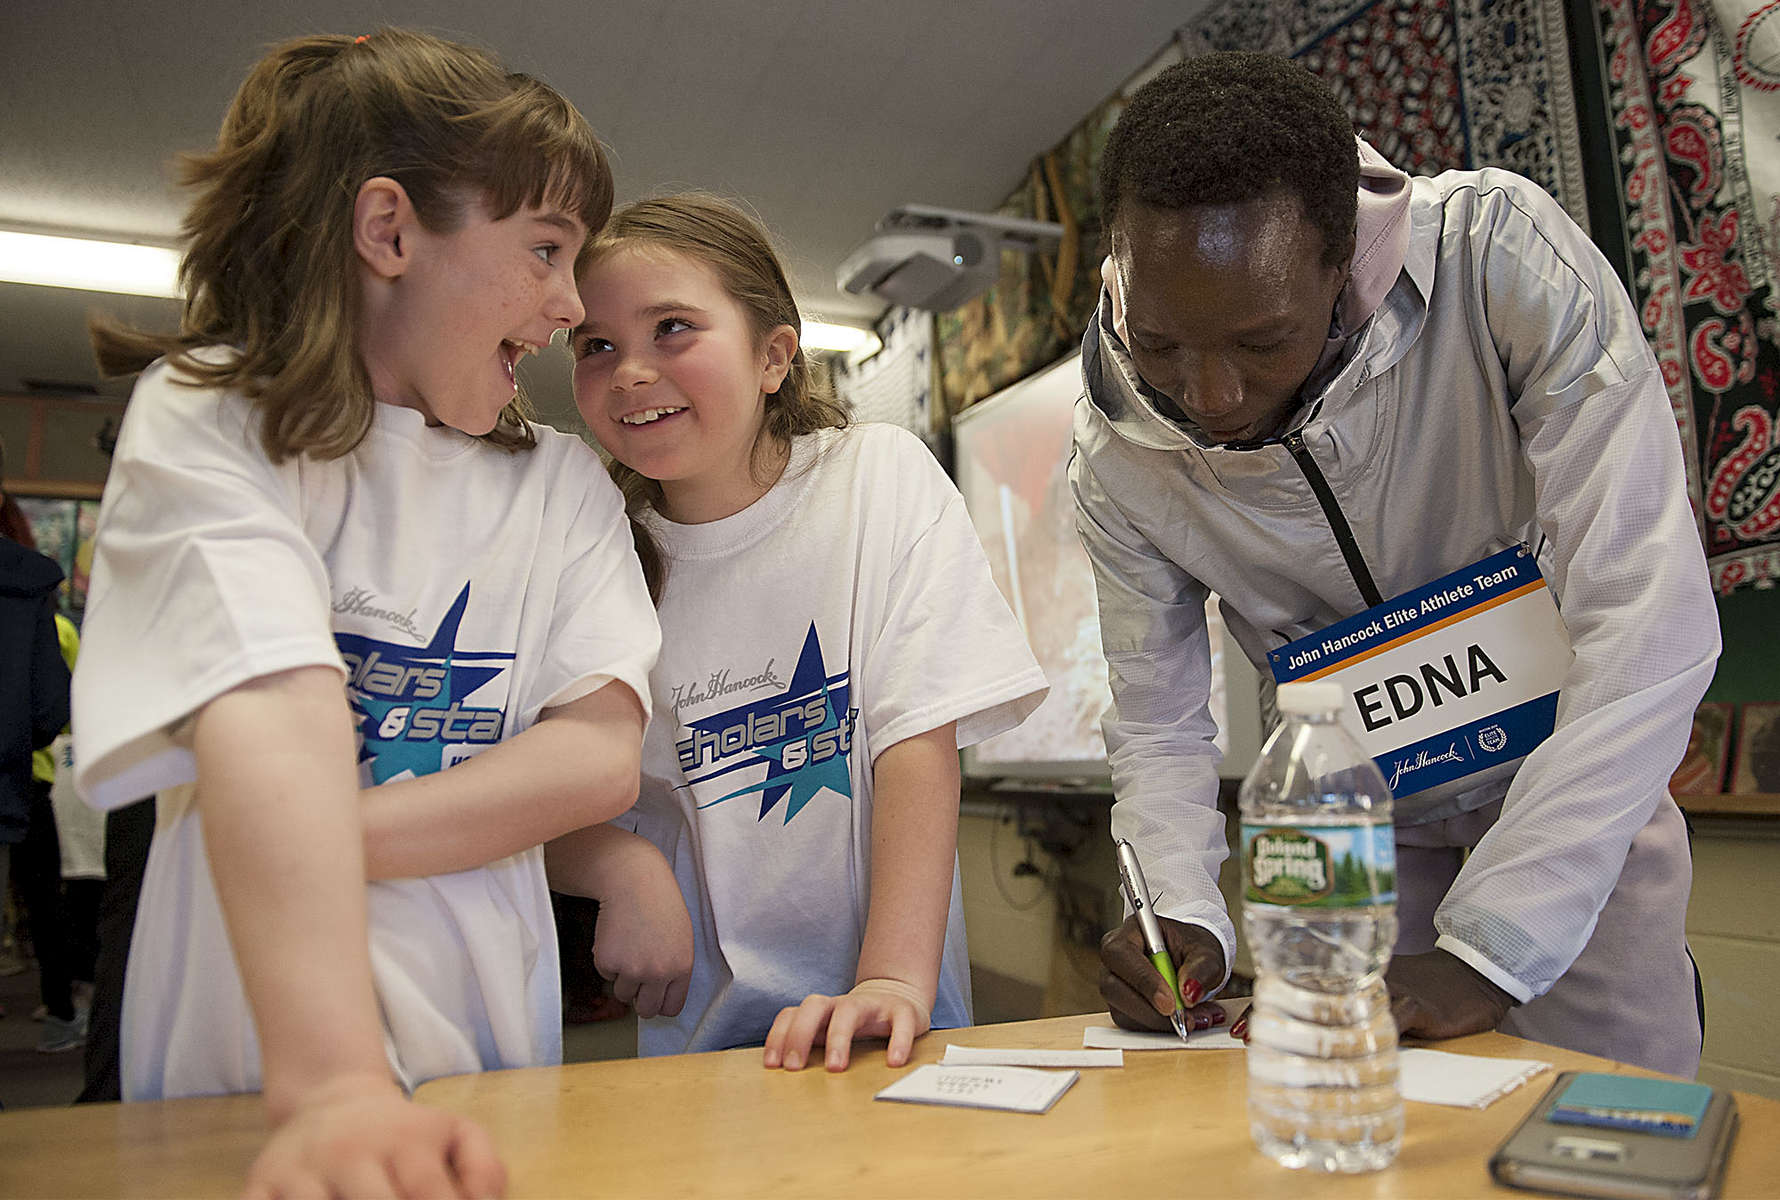 4/11/19-- HOPKINTON-- At the 27th annual John Hancock Scholars and Stars pre-Boston Marathon pep rally at the Elmwood Elementary School on Thursday, third graders from Tom Keane's class,  Lilly Donovan, left, and Leah Colvin, react as 2017 Boston Marathon womens winner Edna Kiplagat writes down her personal email for the girls so they can stay in touch.  [Daily News and Wicked Local Staff Photo/Art Illman]